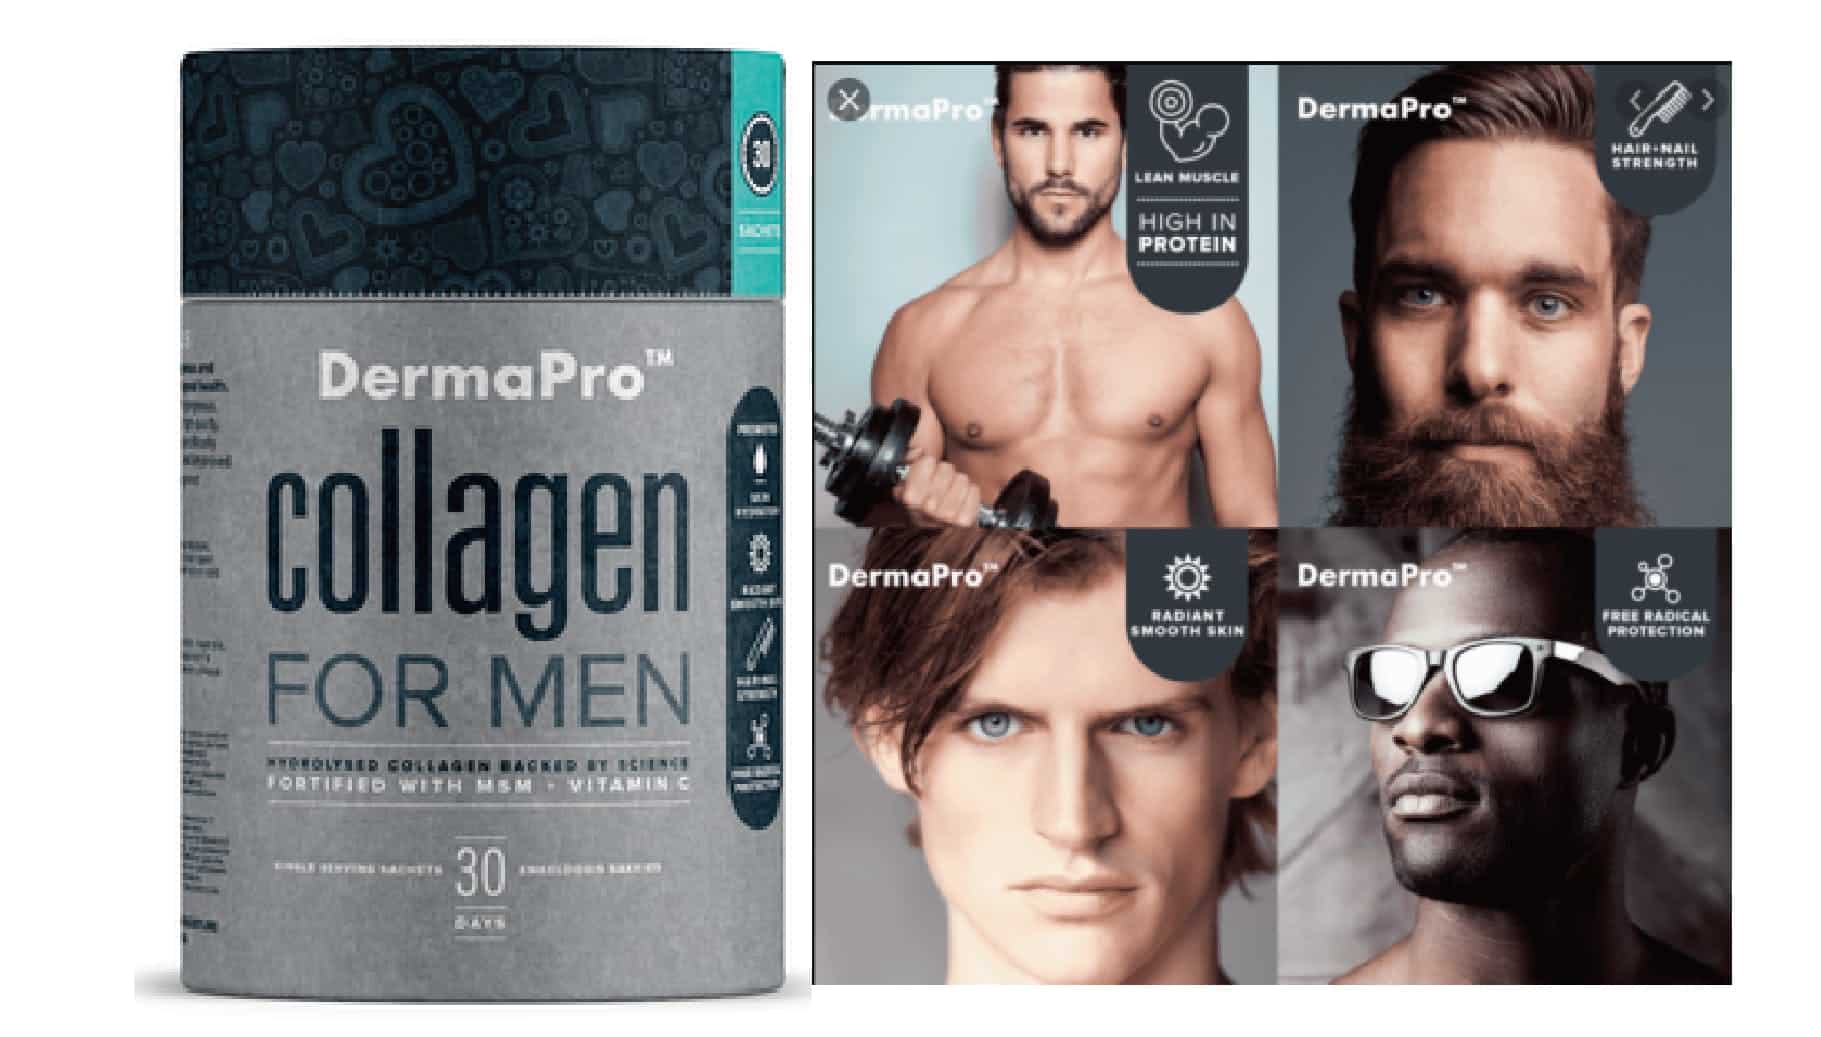 More and more men are taking collagen